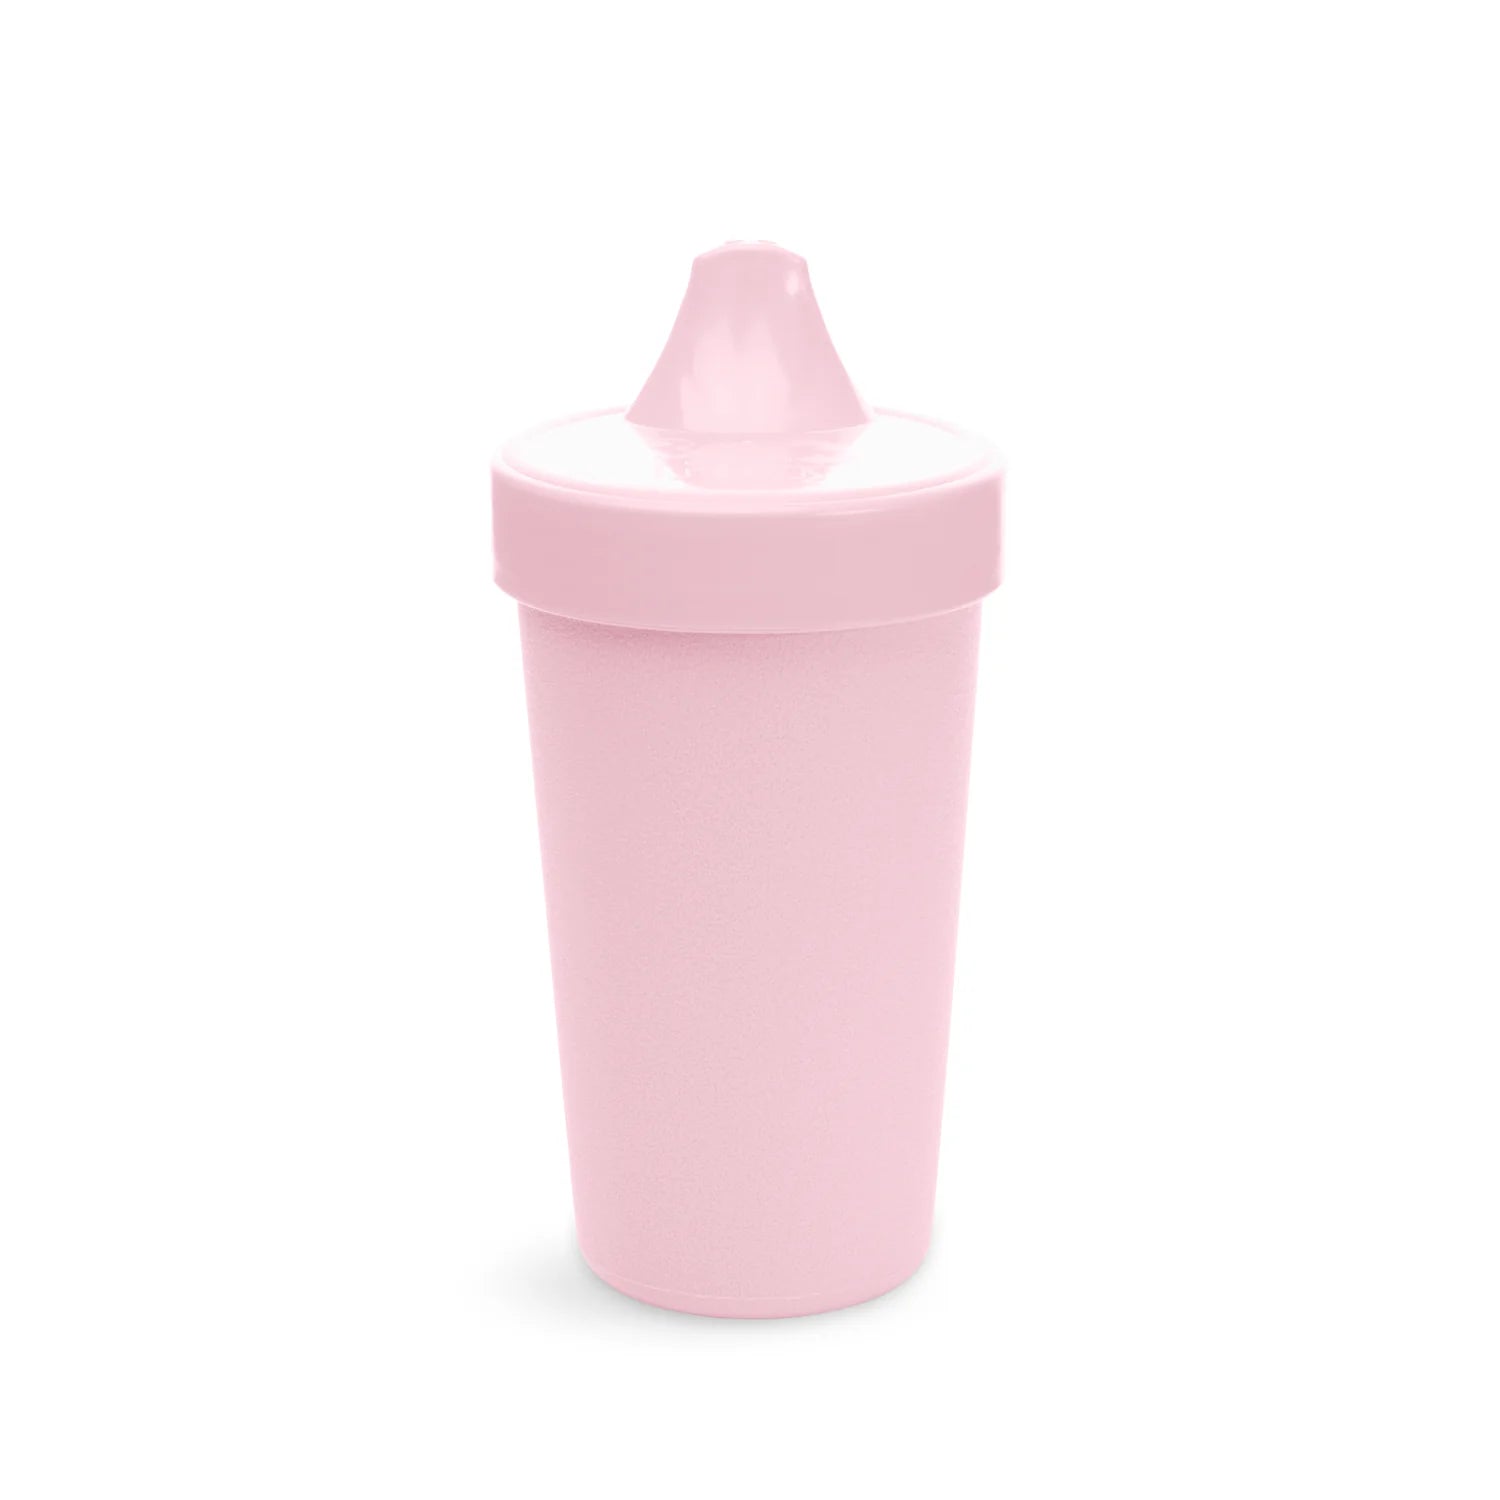 Re-Play No-Spill Cup - Ice Pink